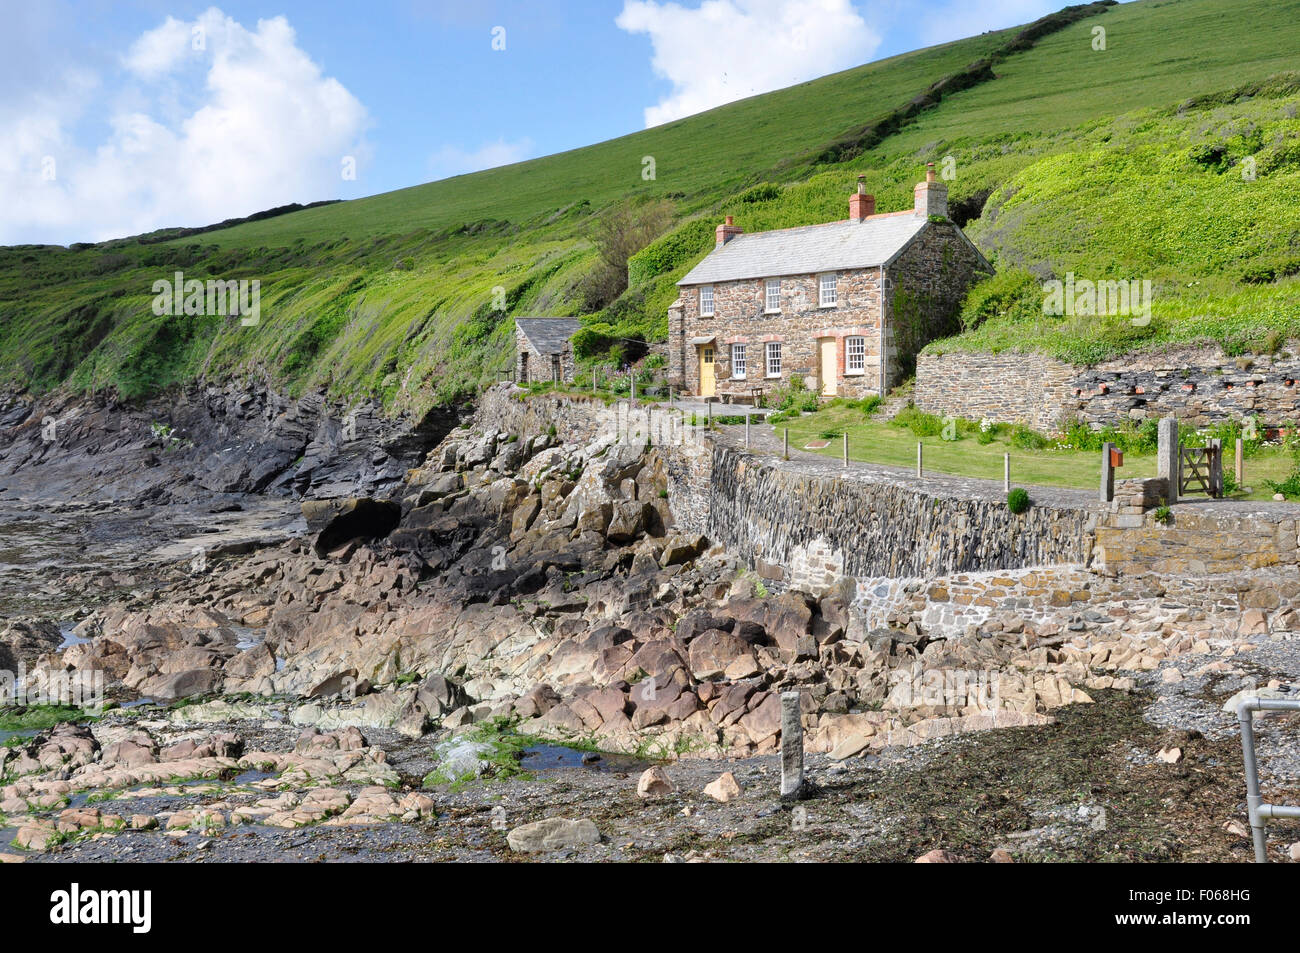 North Cornwall - Port Quin - traditional slate +stone built cottages set above rugged  shoreline - backdrop steeply rising hills Stock Photo